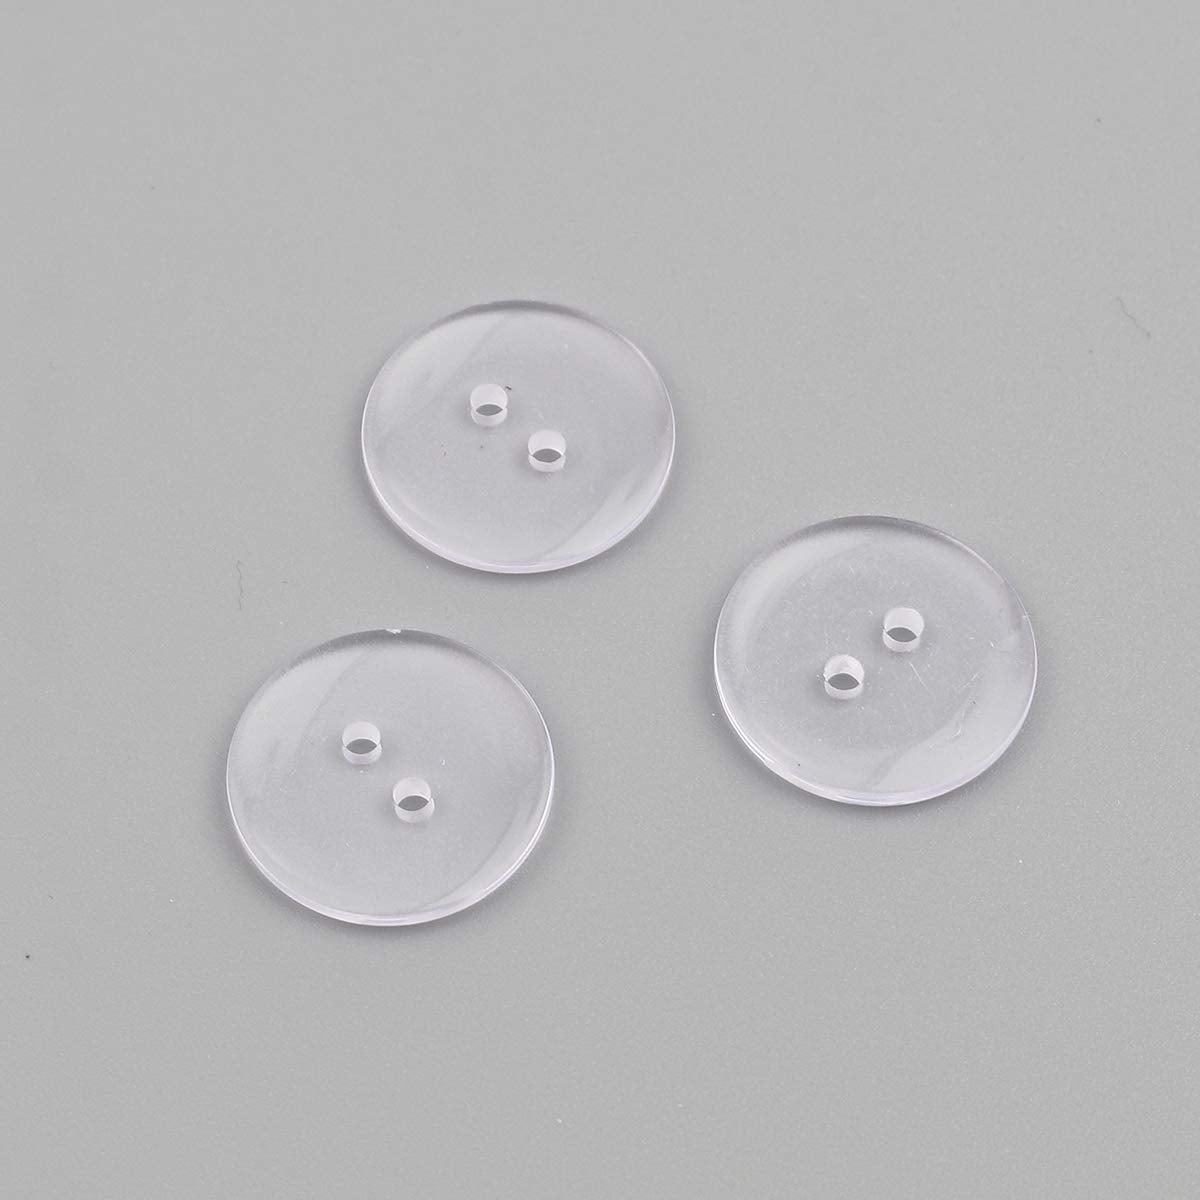 25 x Plain Round 2 Hole Clear/Transparent 15mm Resin Sewing Buttons for Knitting, Arts, Crafts and Clothes